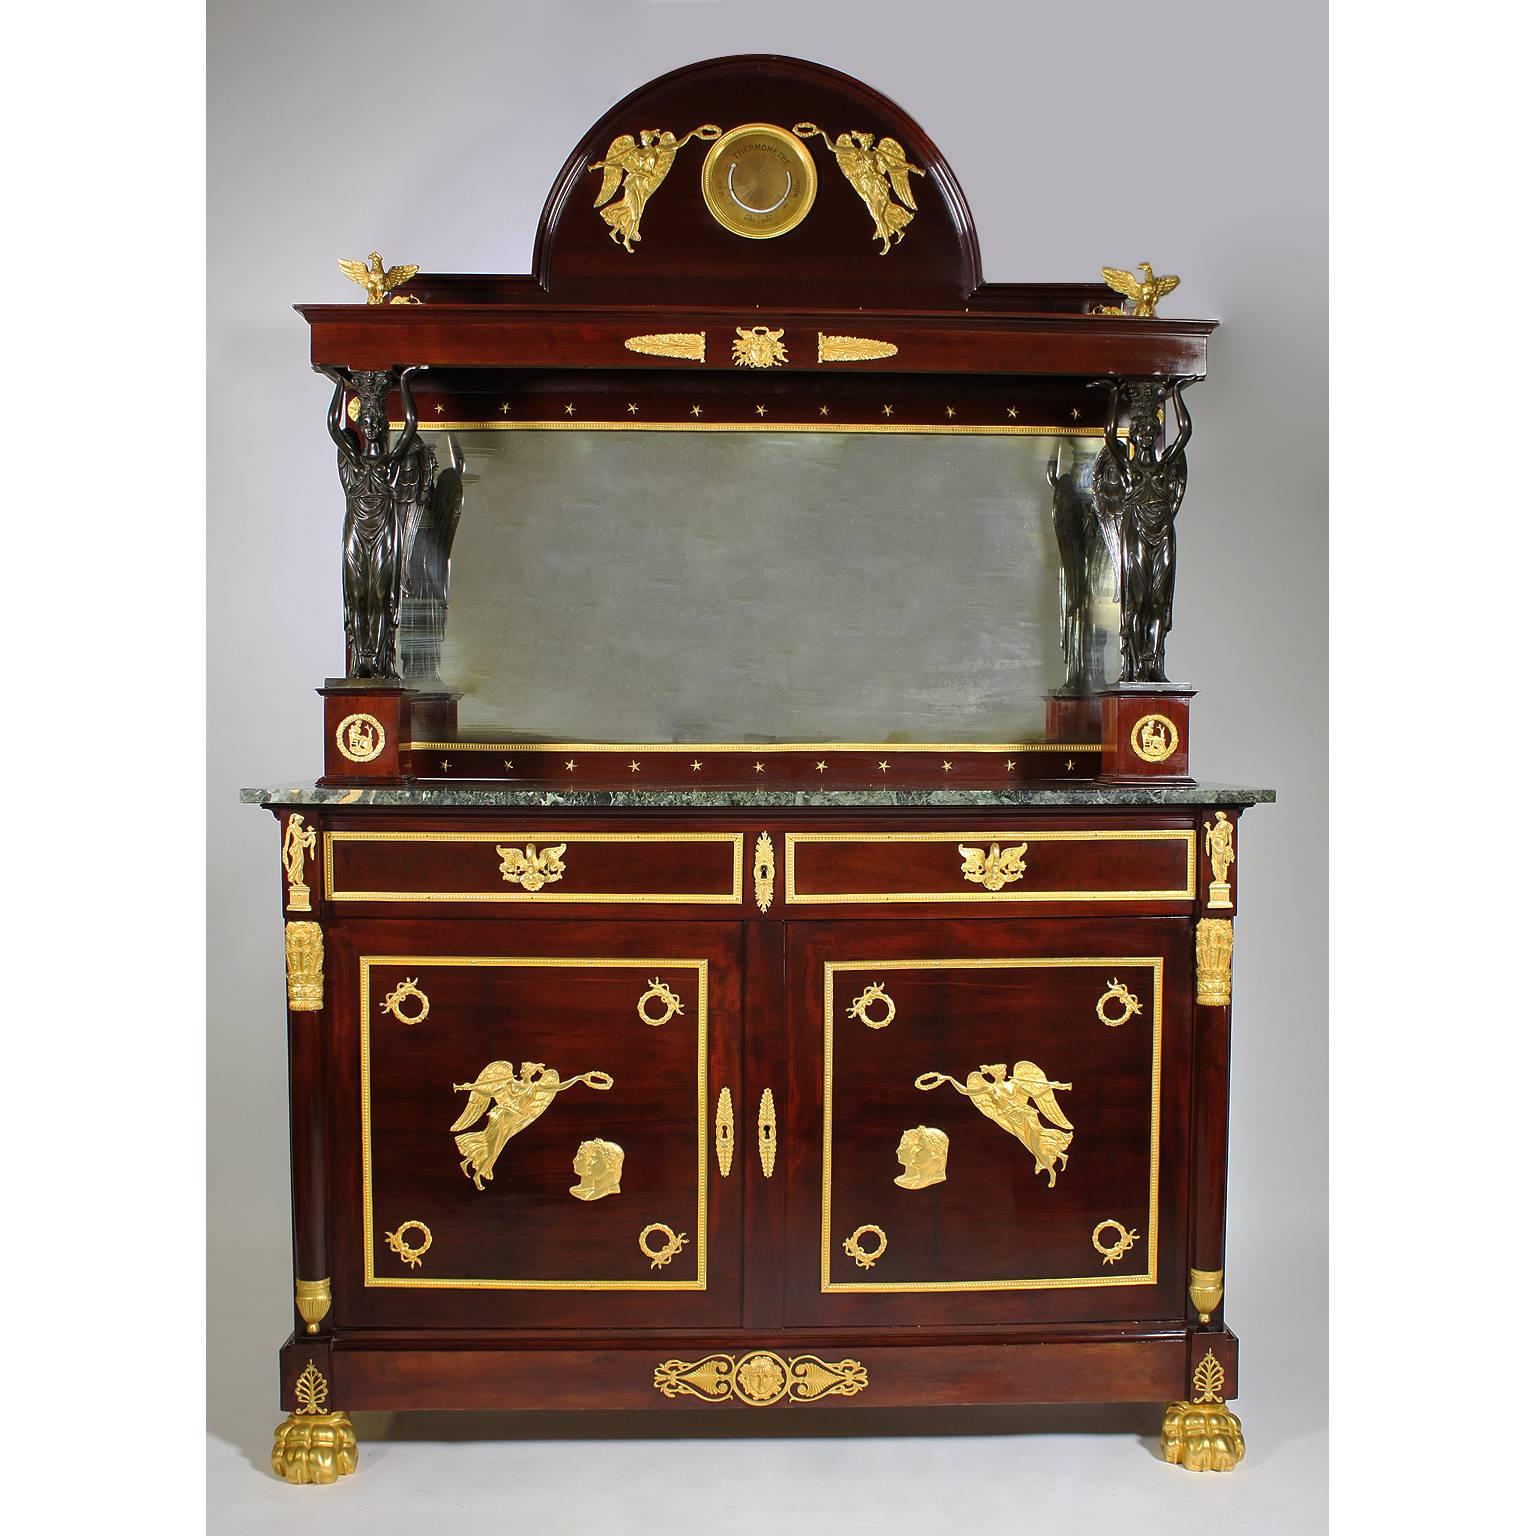 An impressive pair of Napoleon III Empire Revival mahogany, gilt-bronze and patinated bronze-mounted server buffets, after Pierre-Philippe Thomire (1751-1843), each cabinet surmounted with a pair of winged maidens on mahogany stands mounted with